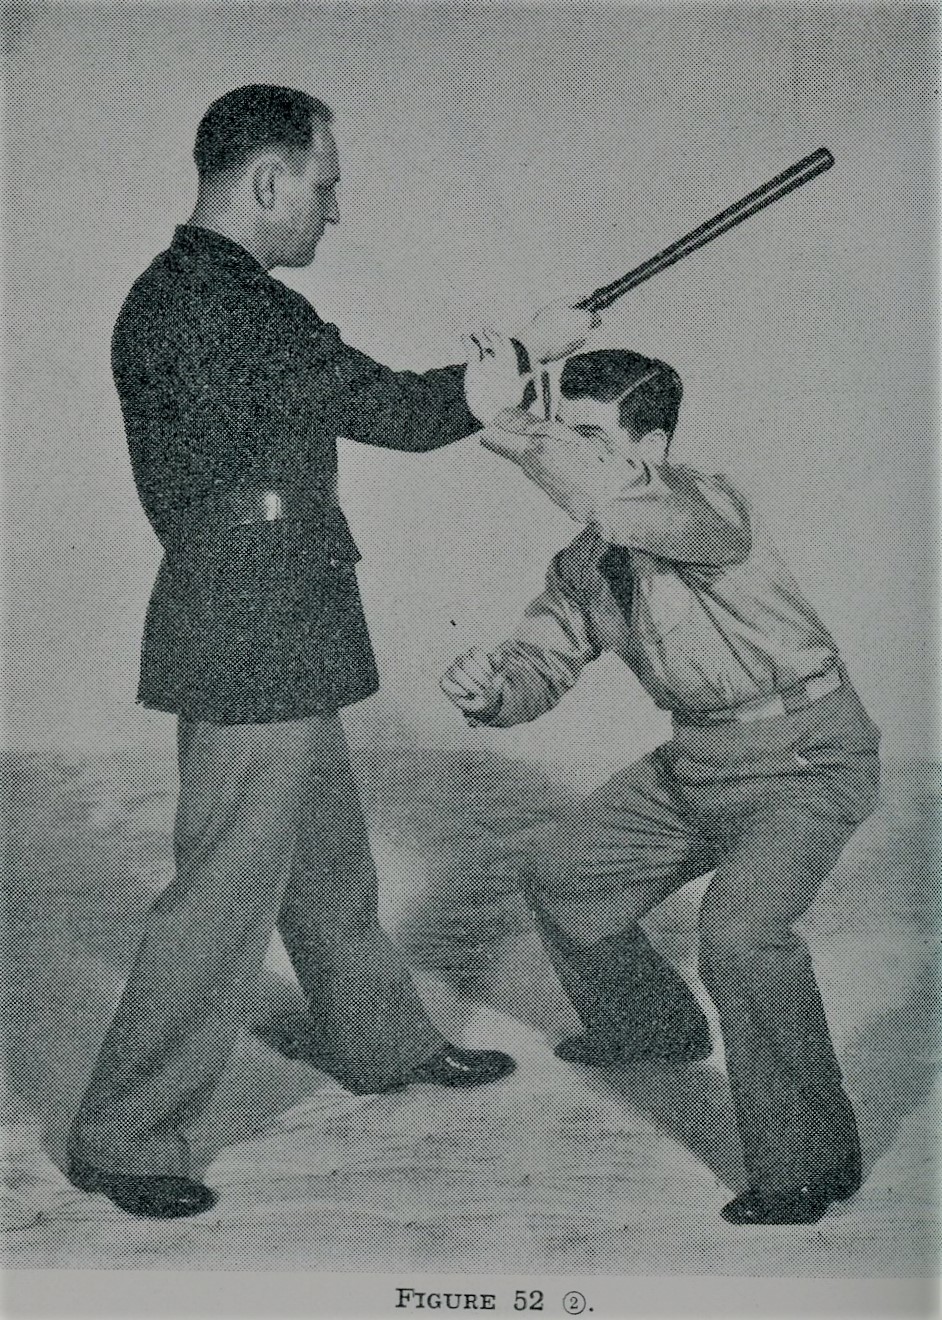 Lowering head to avoid the stroke of club while self defense.